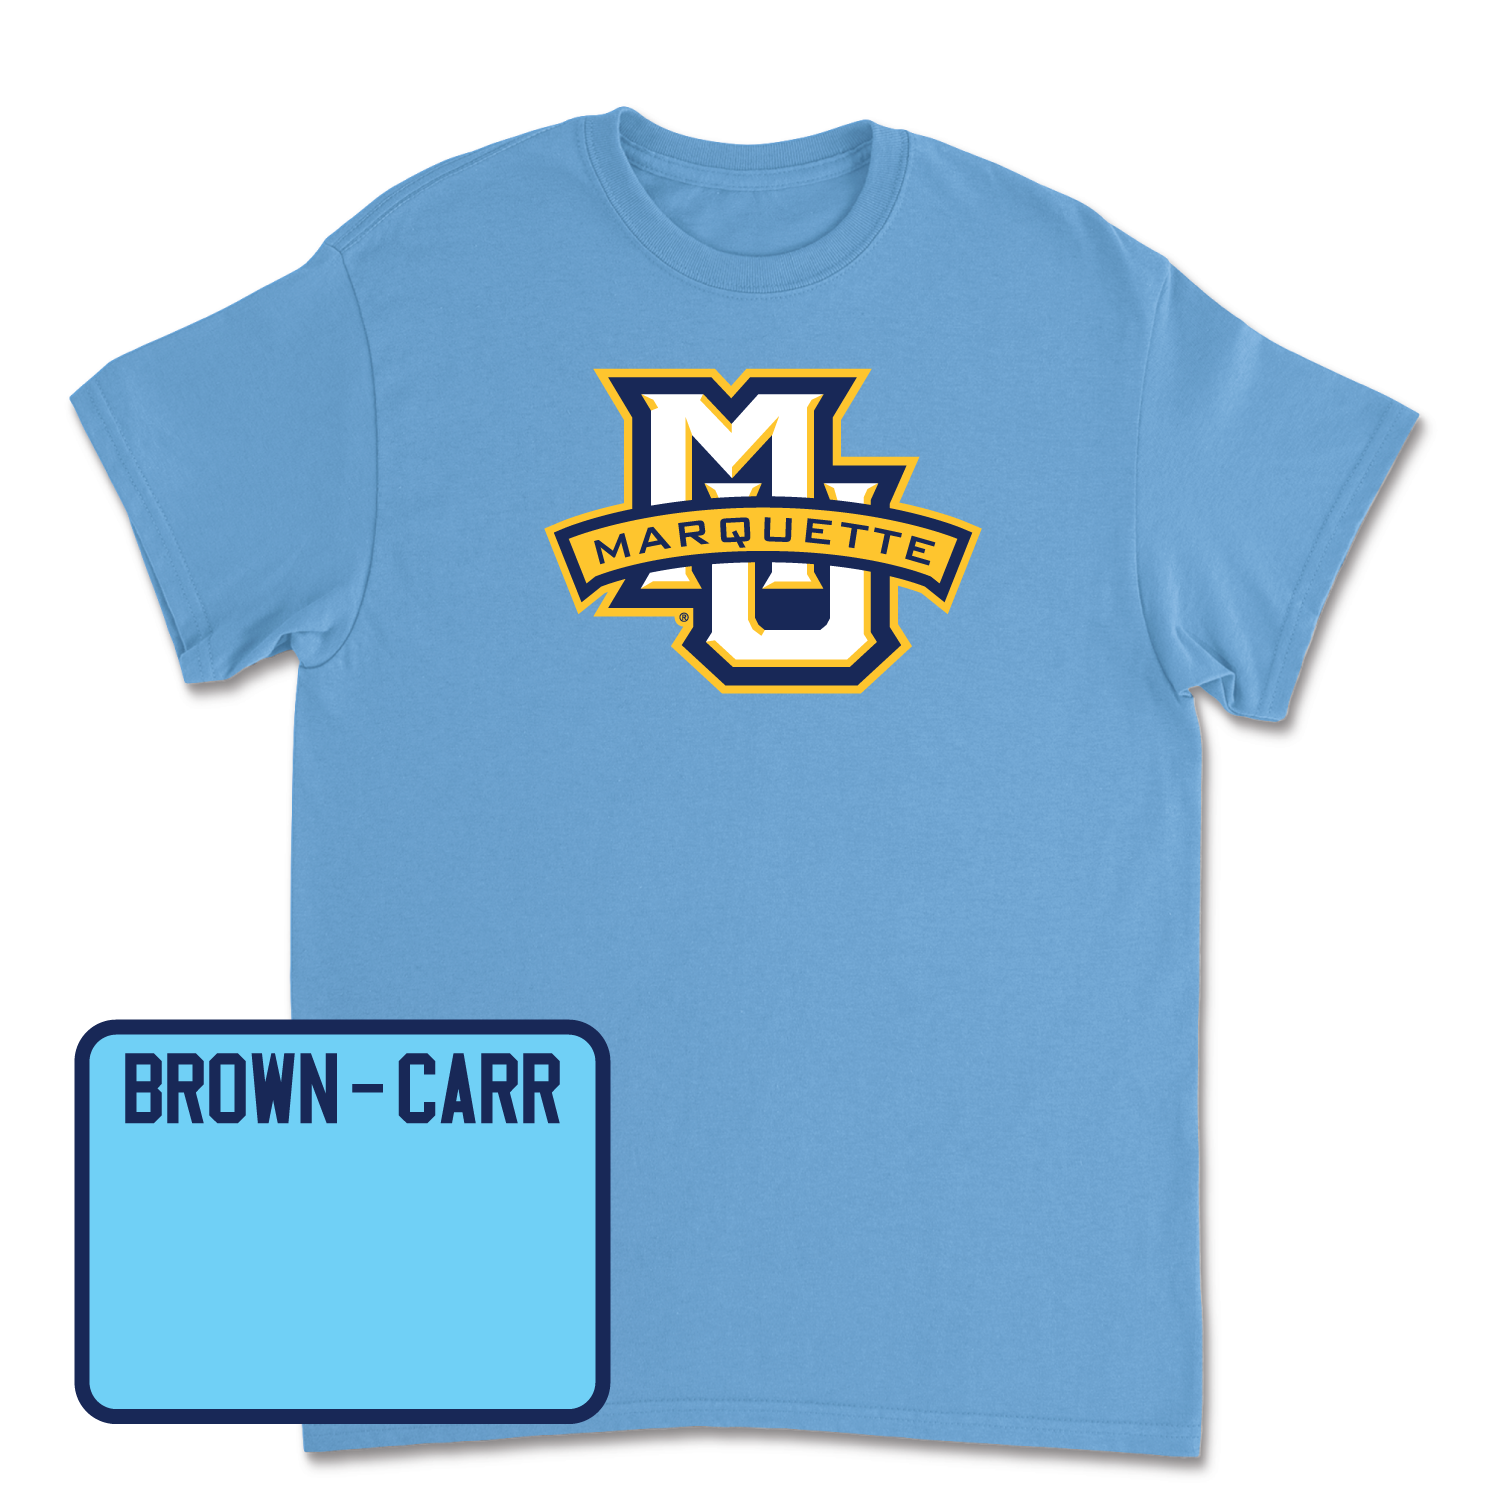 Championship Blue Track & Field Marquette Tee 2 2X-Large / Siani Brown-Carr